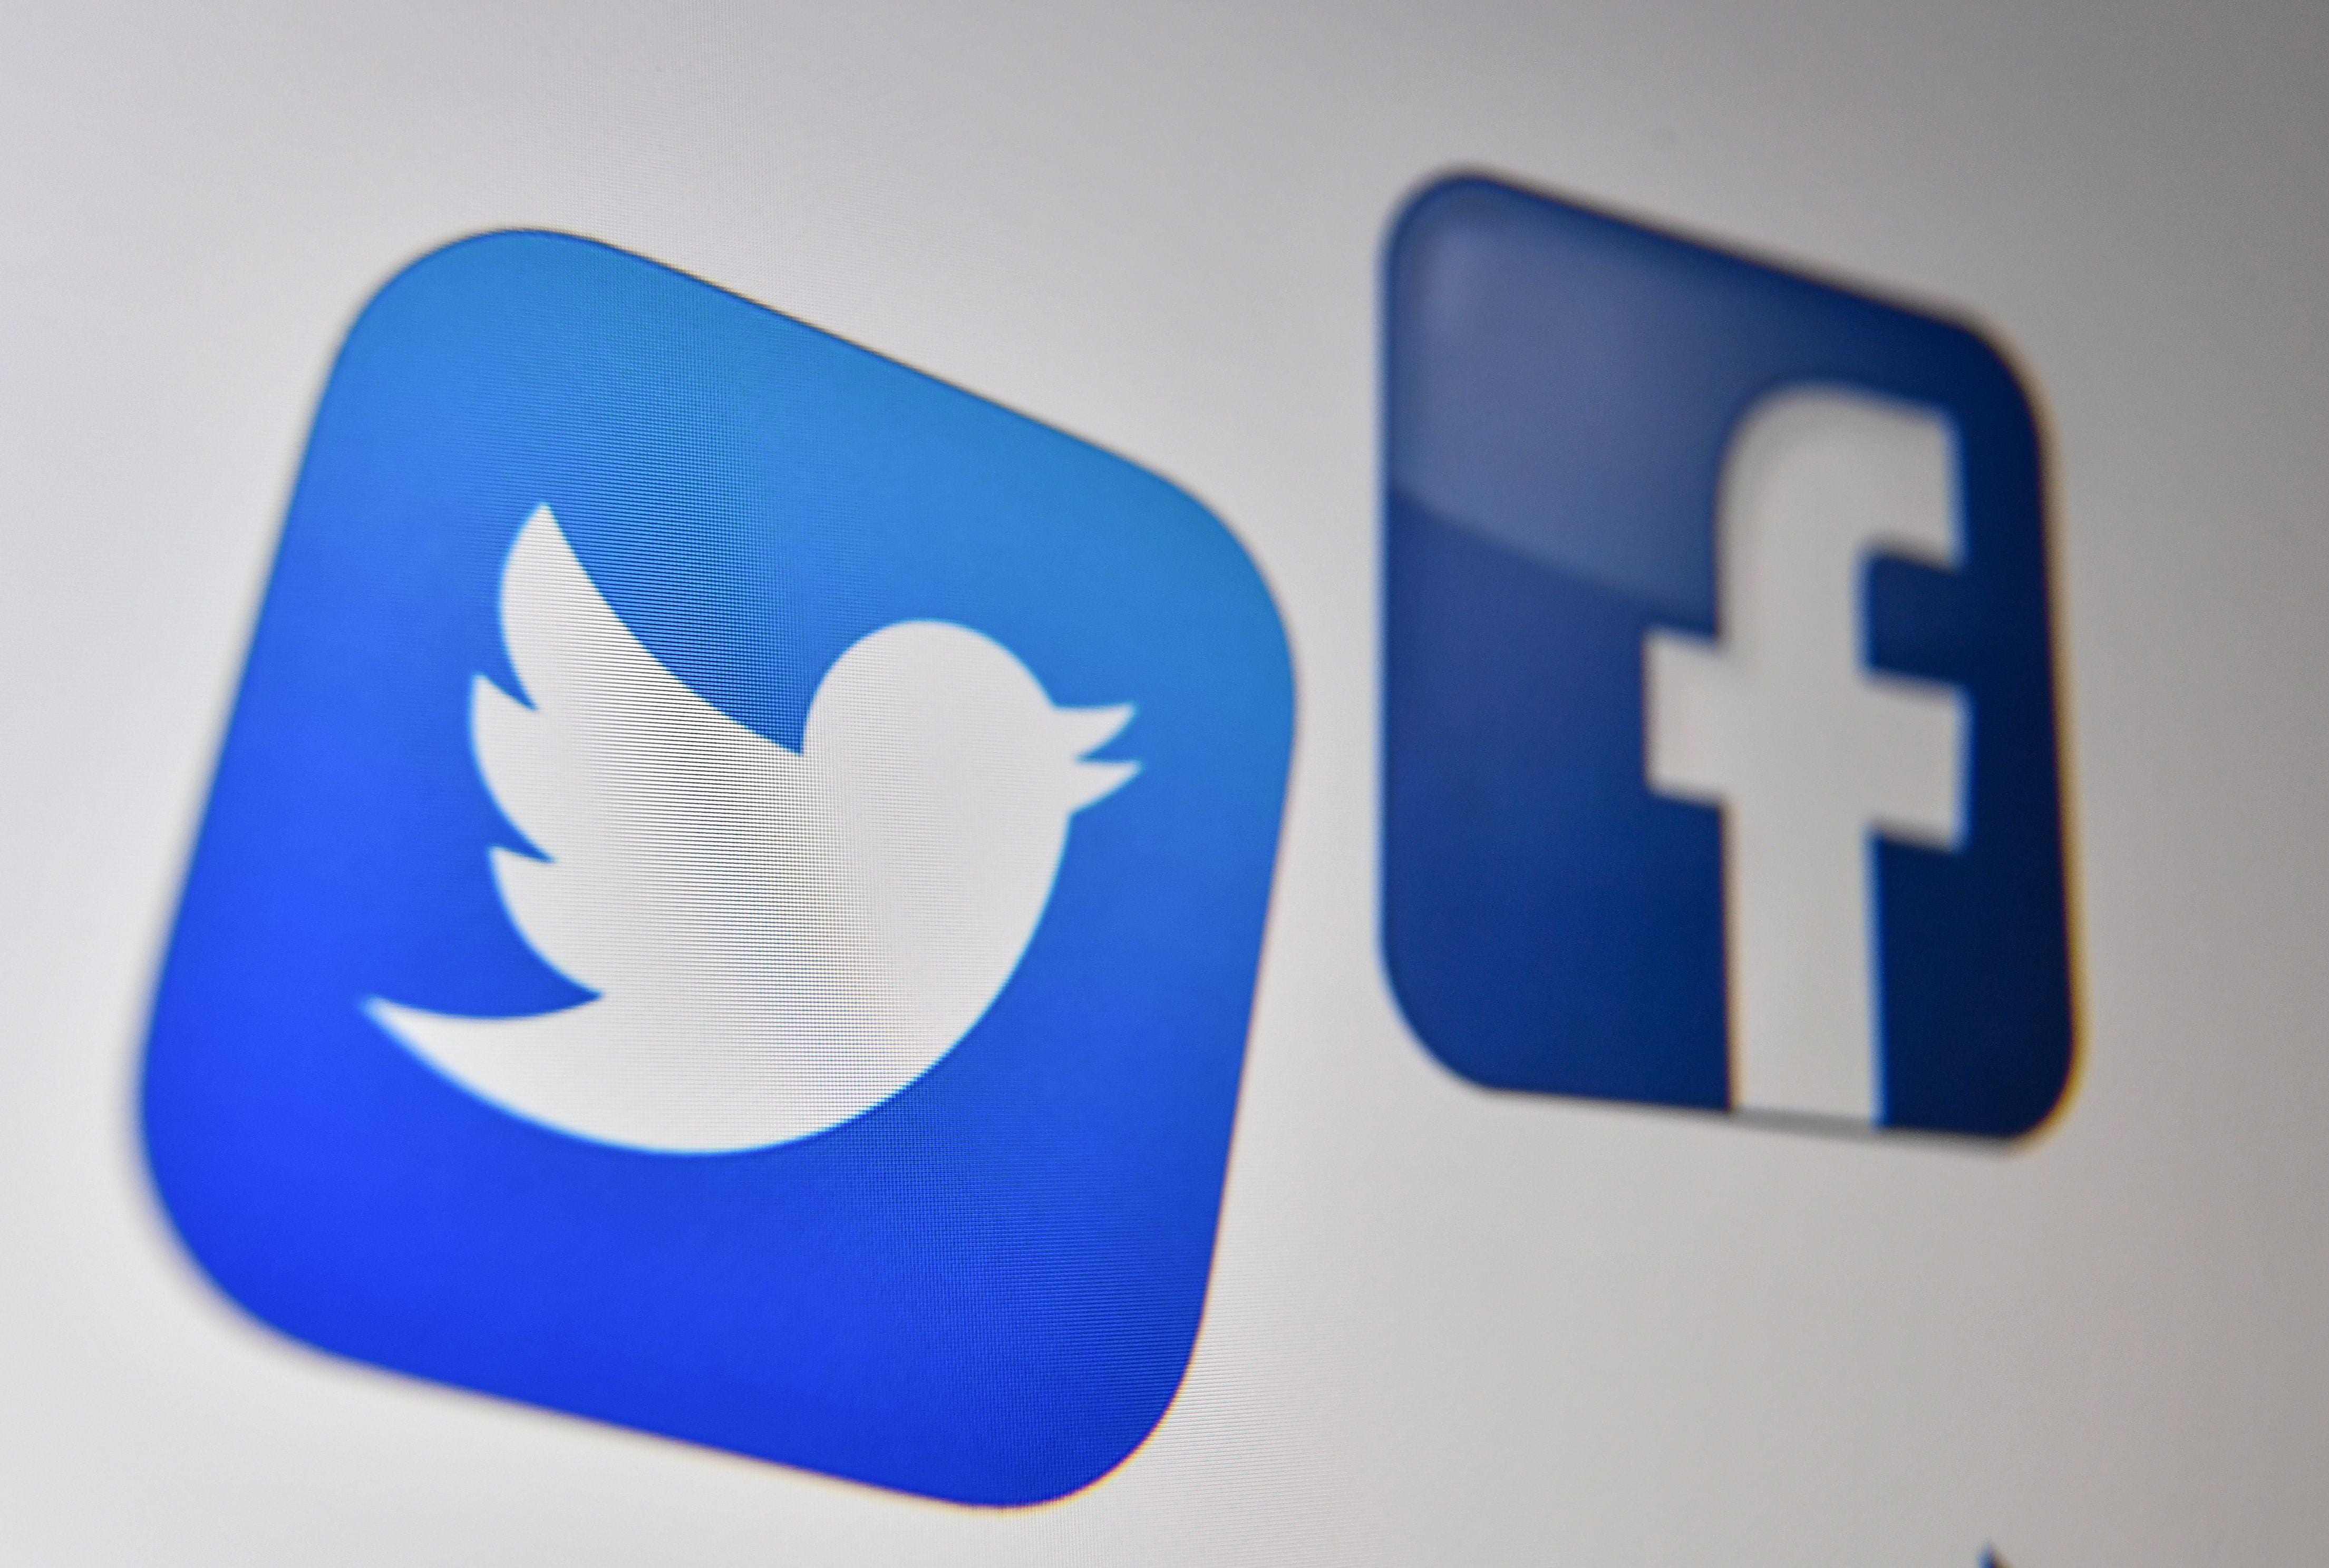 File Image: The government had asked Twitter to remove more than 1,100 accounts related to the ongoing farmer protests